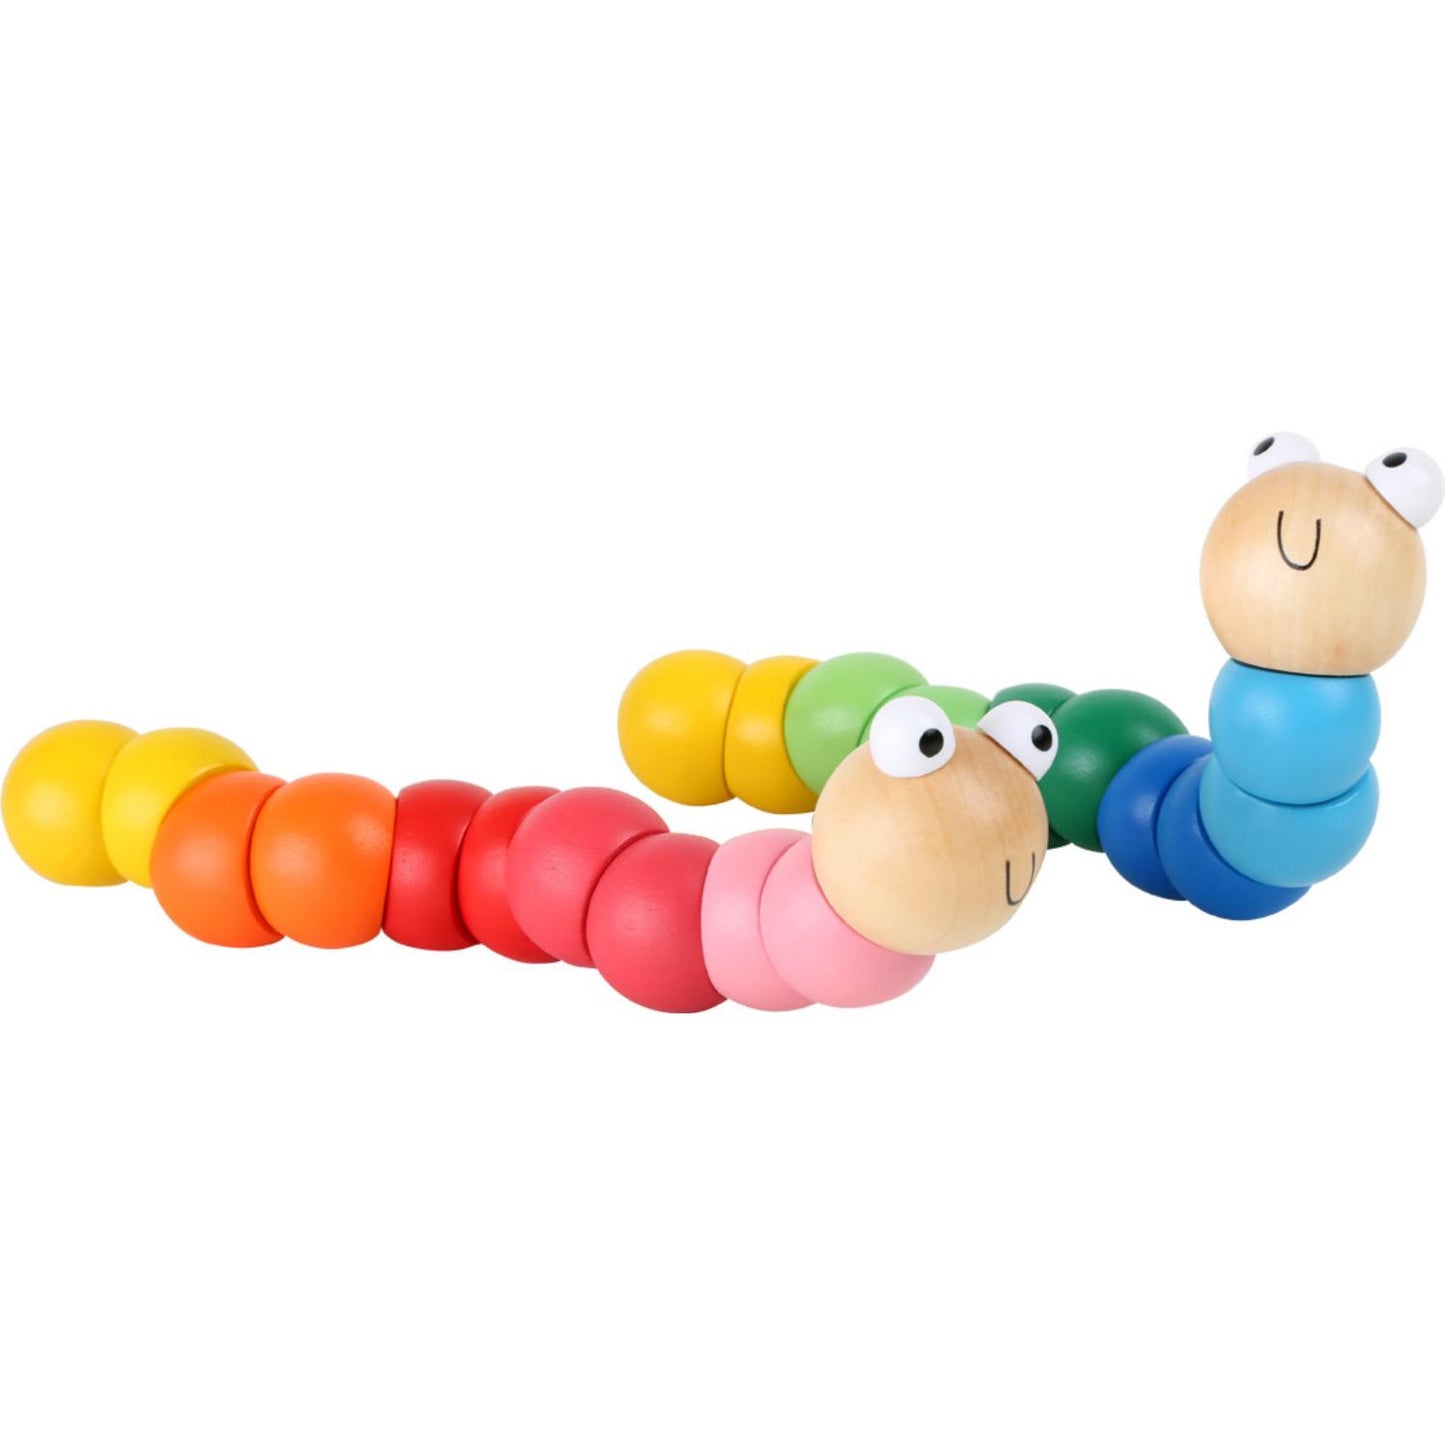 Red Wooden Bead Caterpillar | Baby Activity Toy | Side View together with Blue Wooden Bead Caterpillar | BeoVERDE.ie